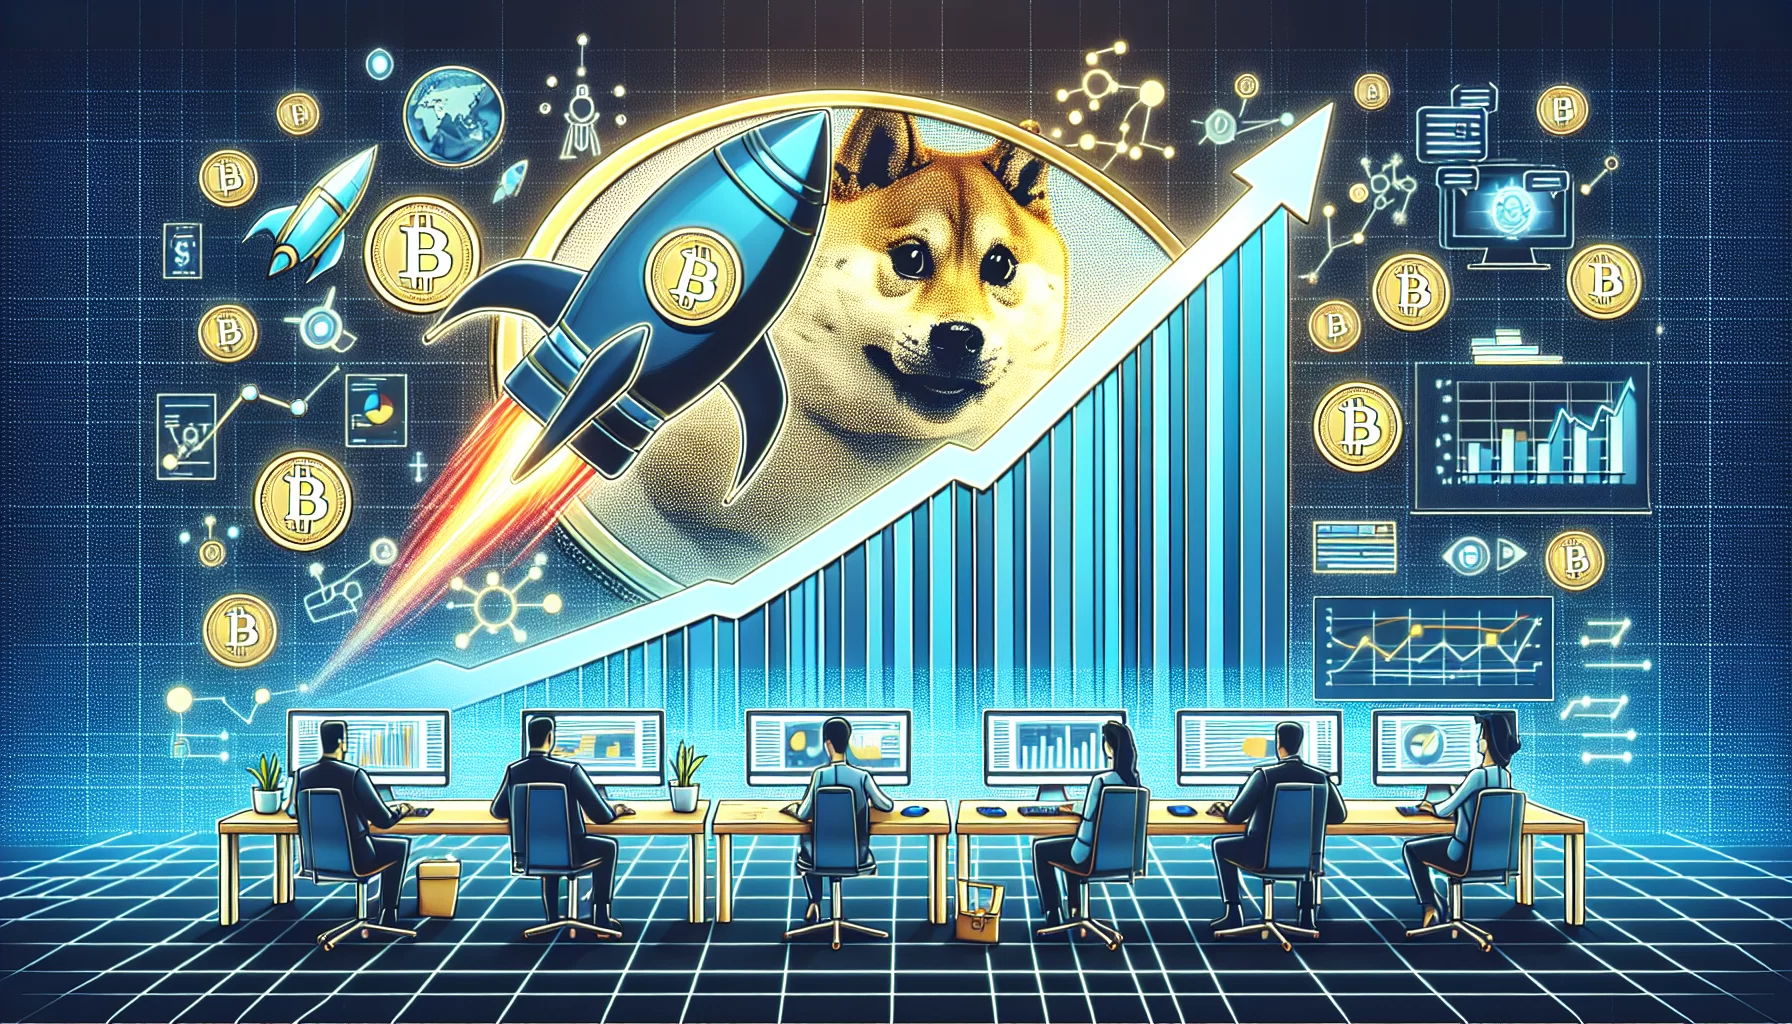 Exploring the unusual increase of Dogecoin: The influence of Elon Musk and Reddit